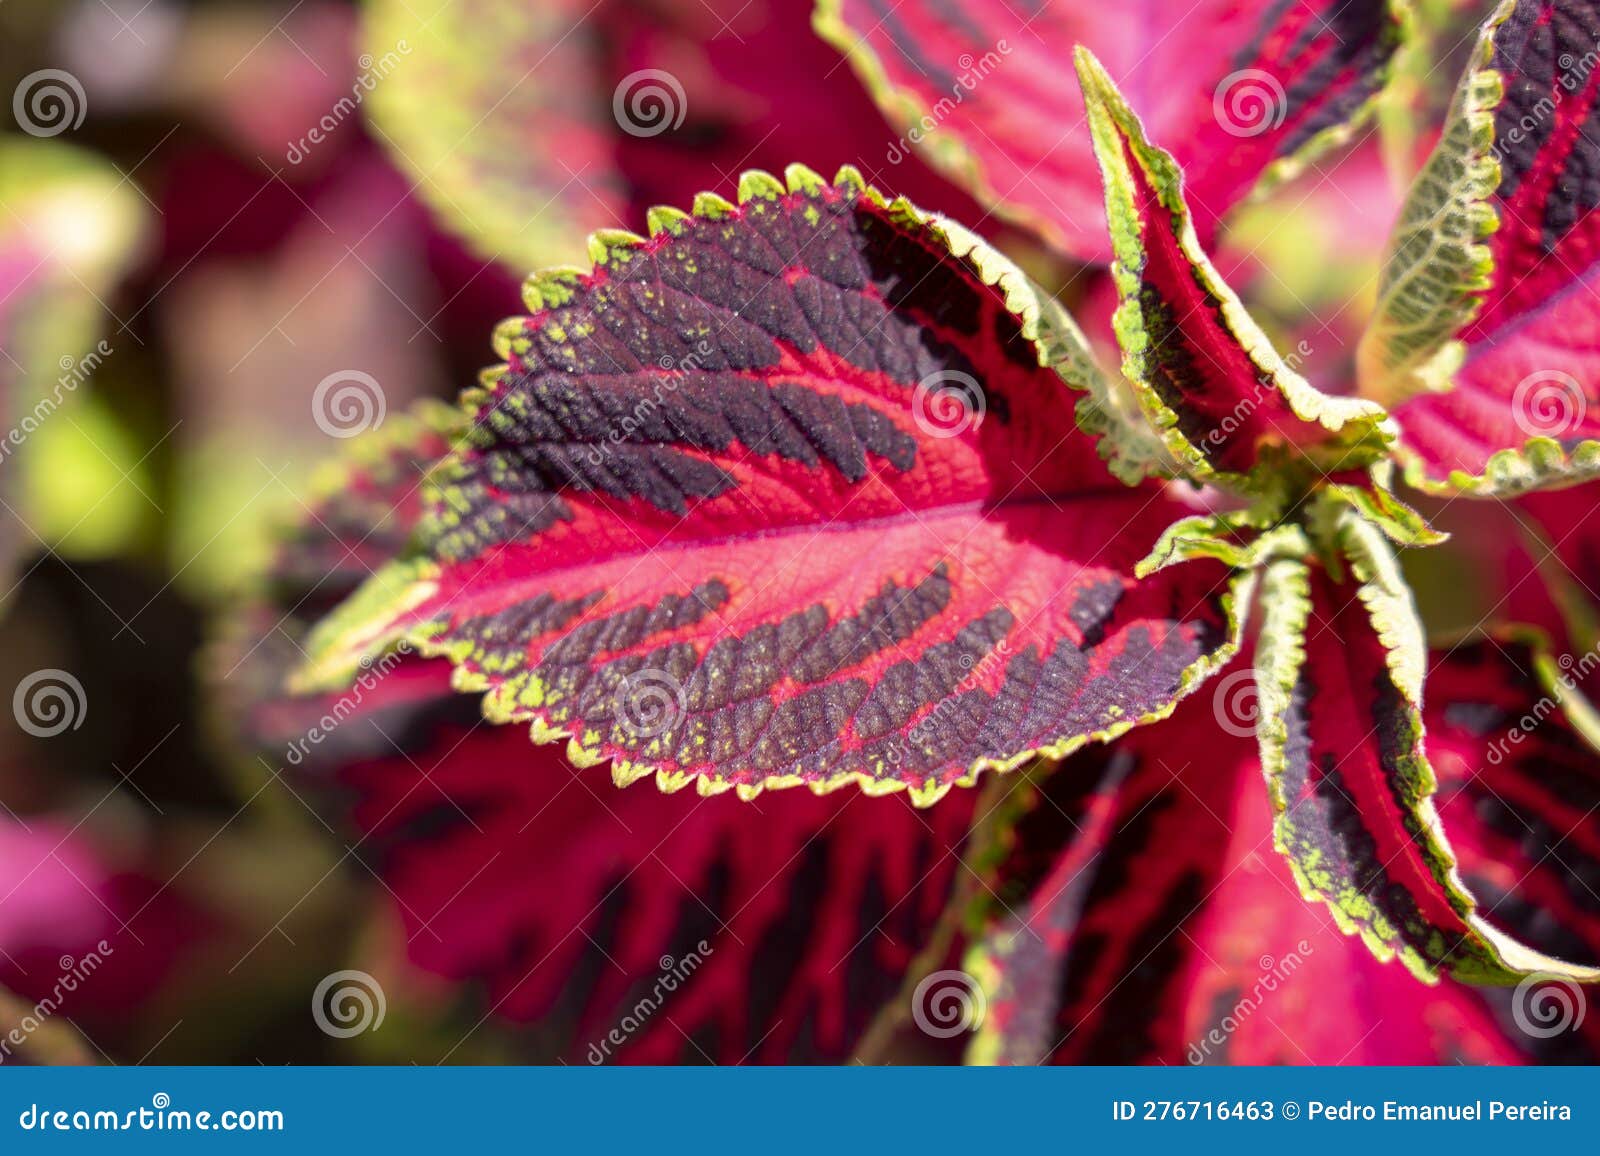 macrophotography of red petals of the coraÃ§Ã£o-maguado plant present in the island of madeira.